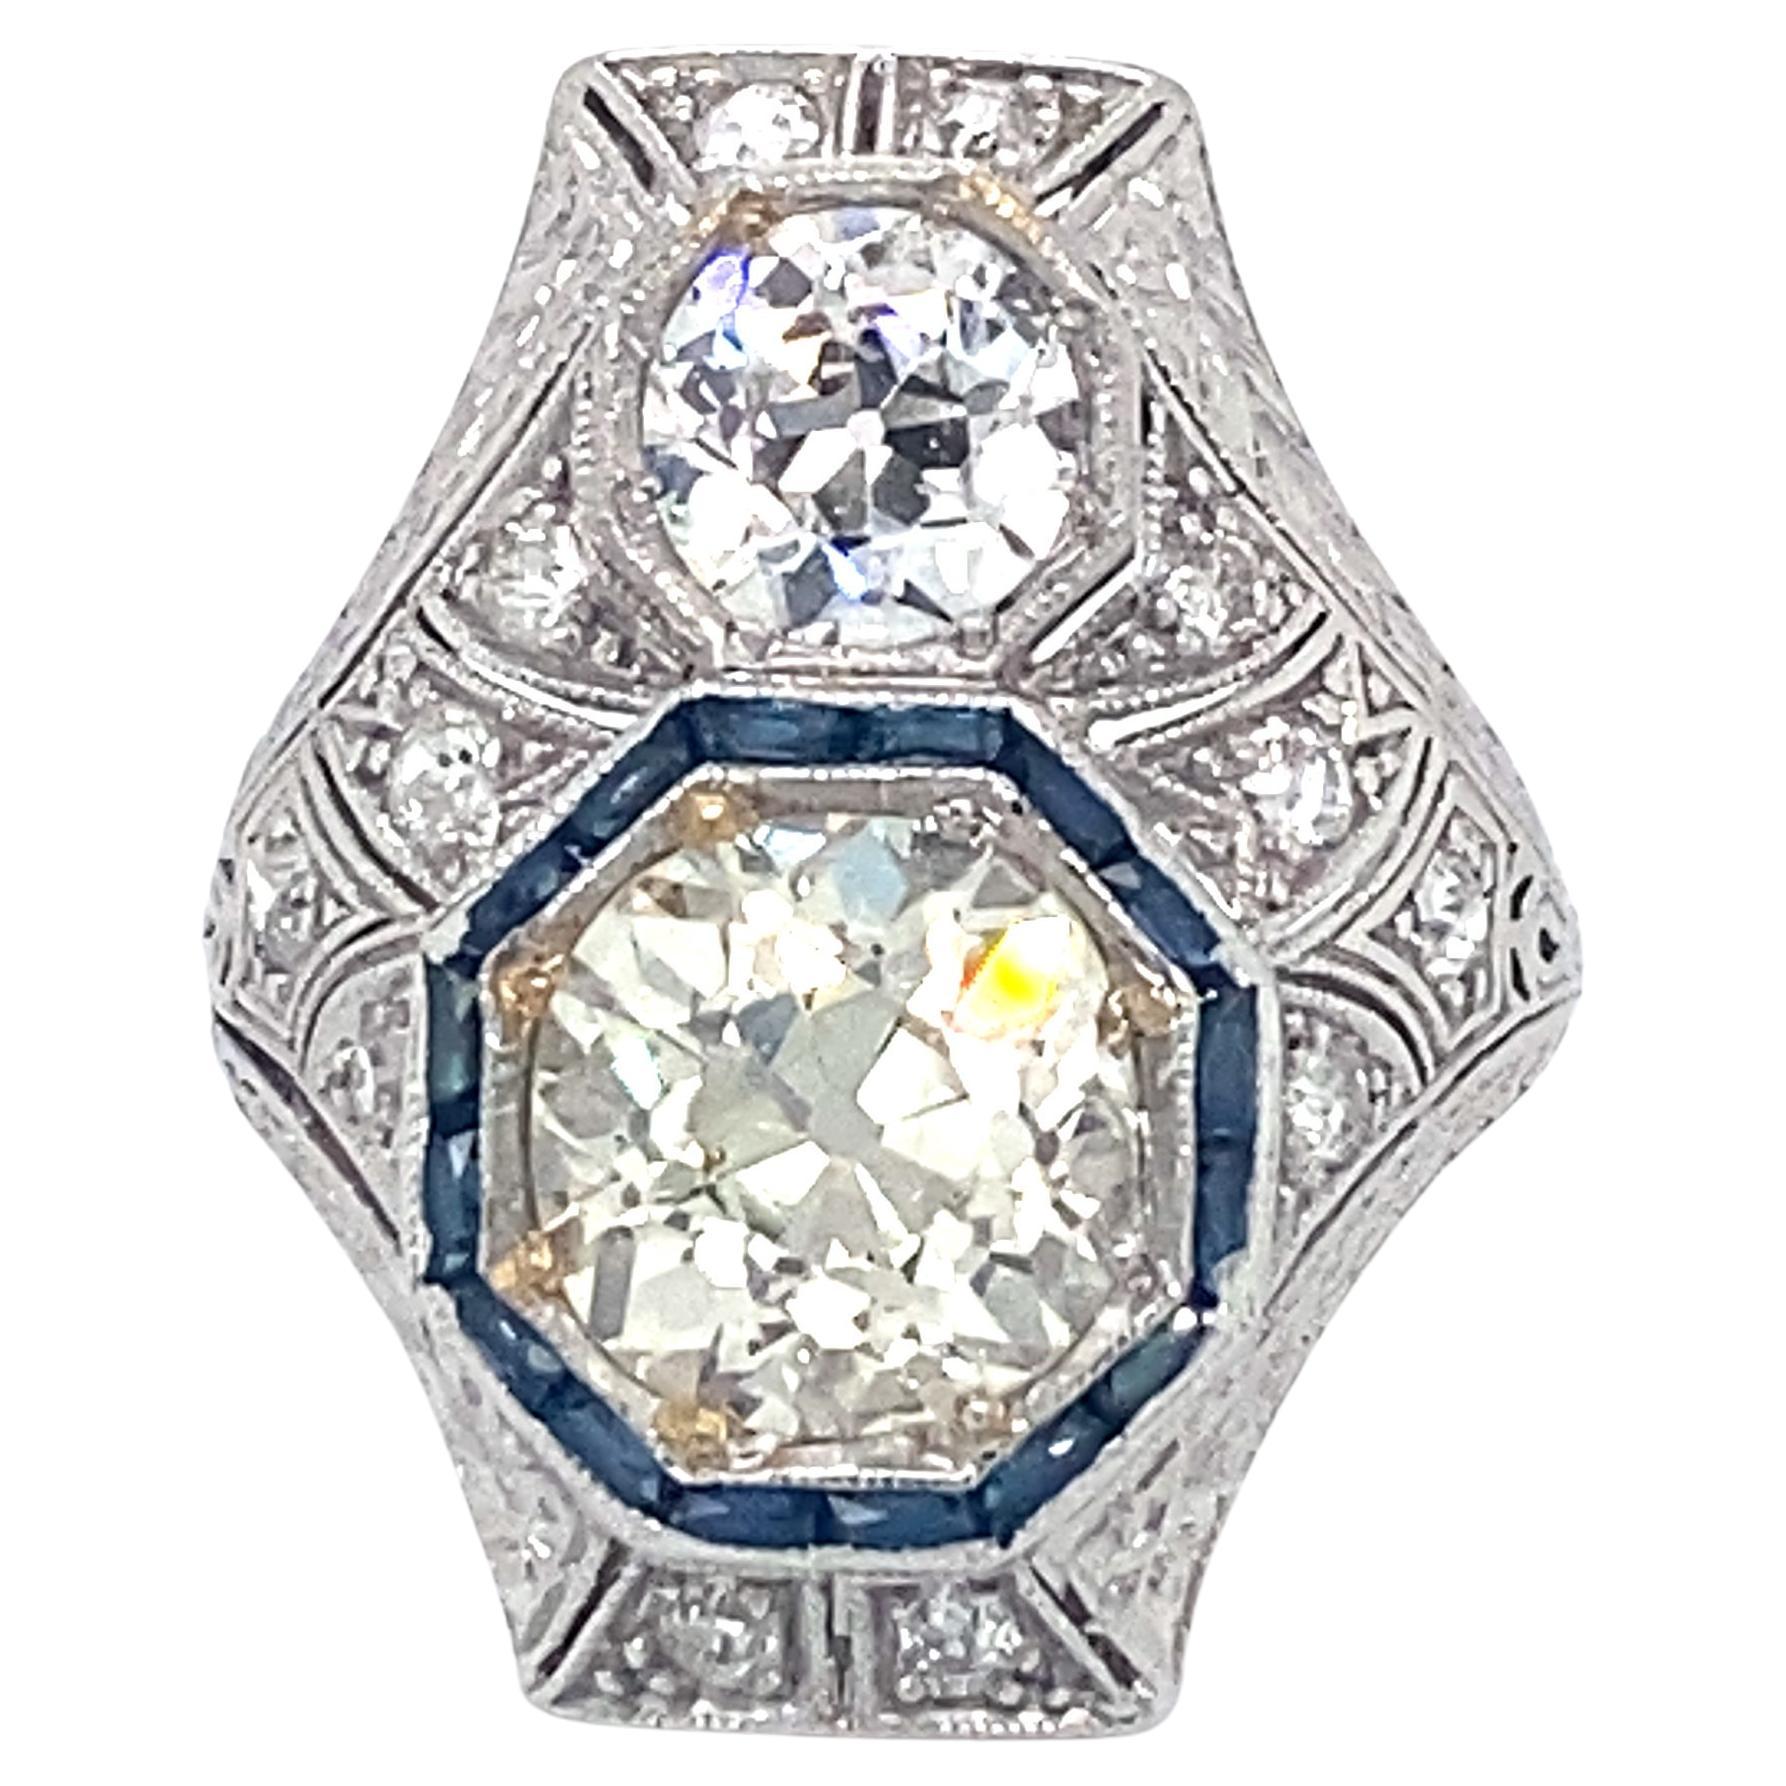 1920s Art Deco 3.70 Carat Total Diamond and Sapphire Cocktail Ring in Platinum